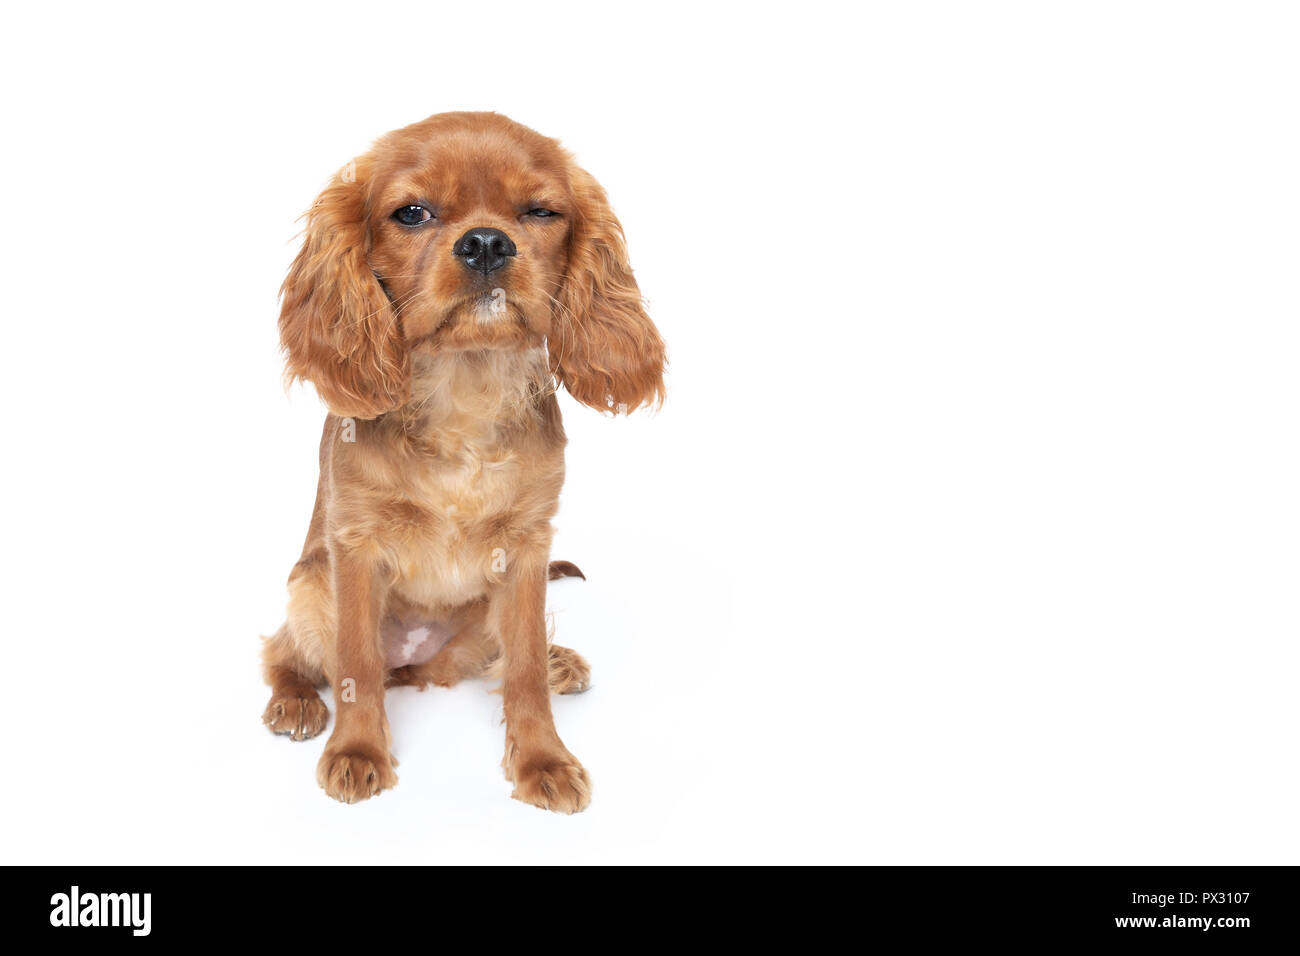 Cute dog with funny face, cavalier spaniel puppy, isolated on white background Stock Photo